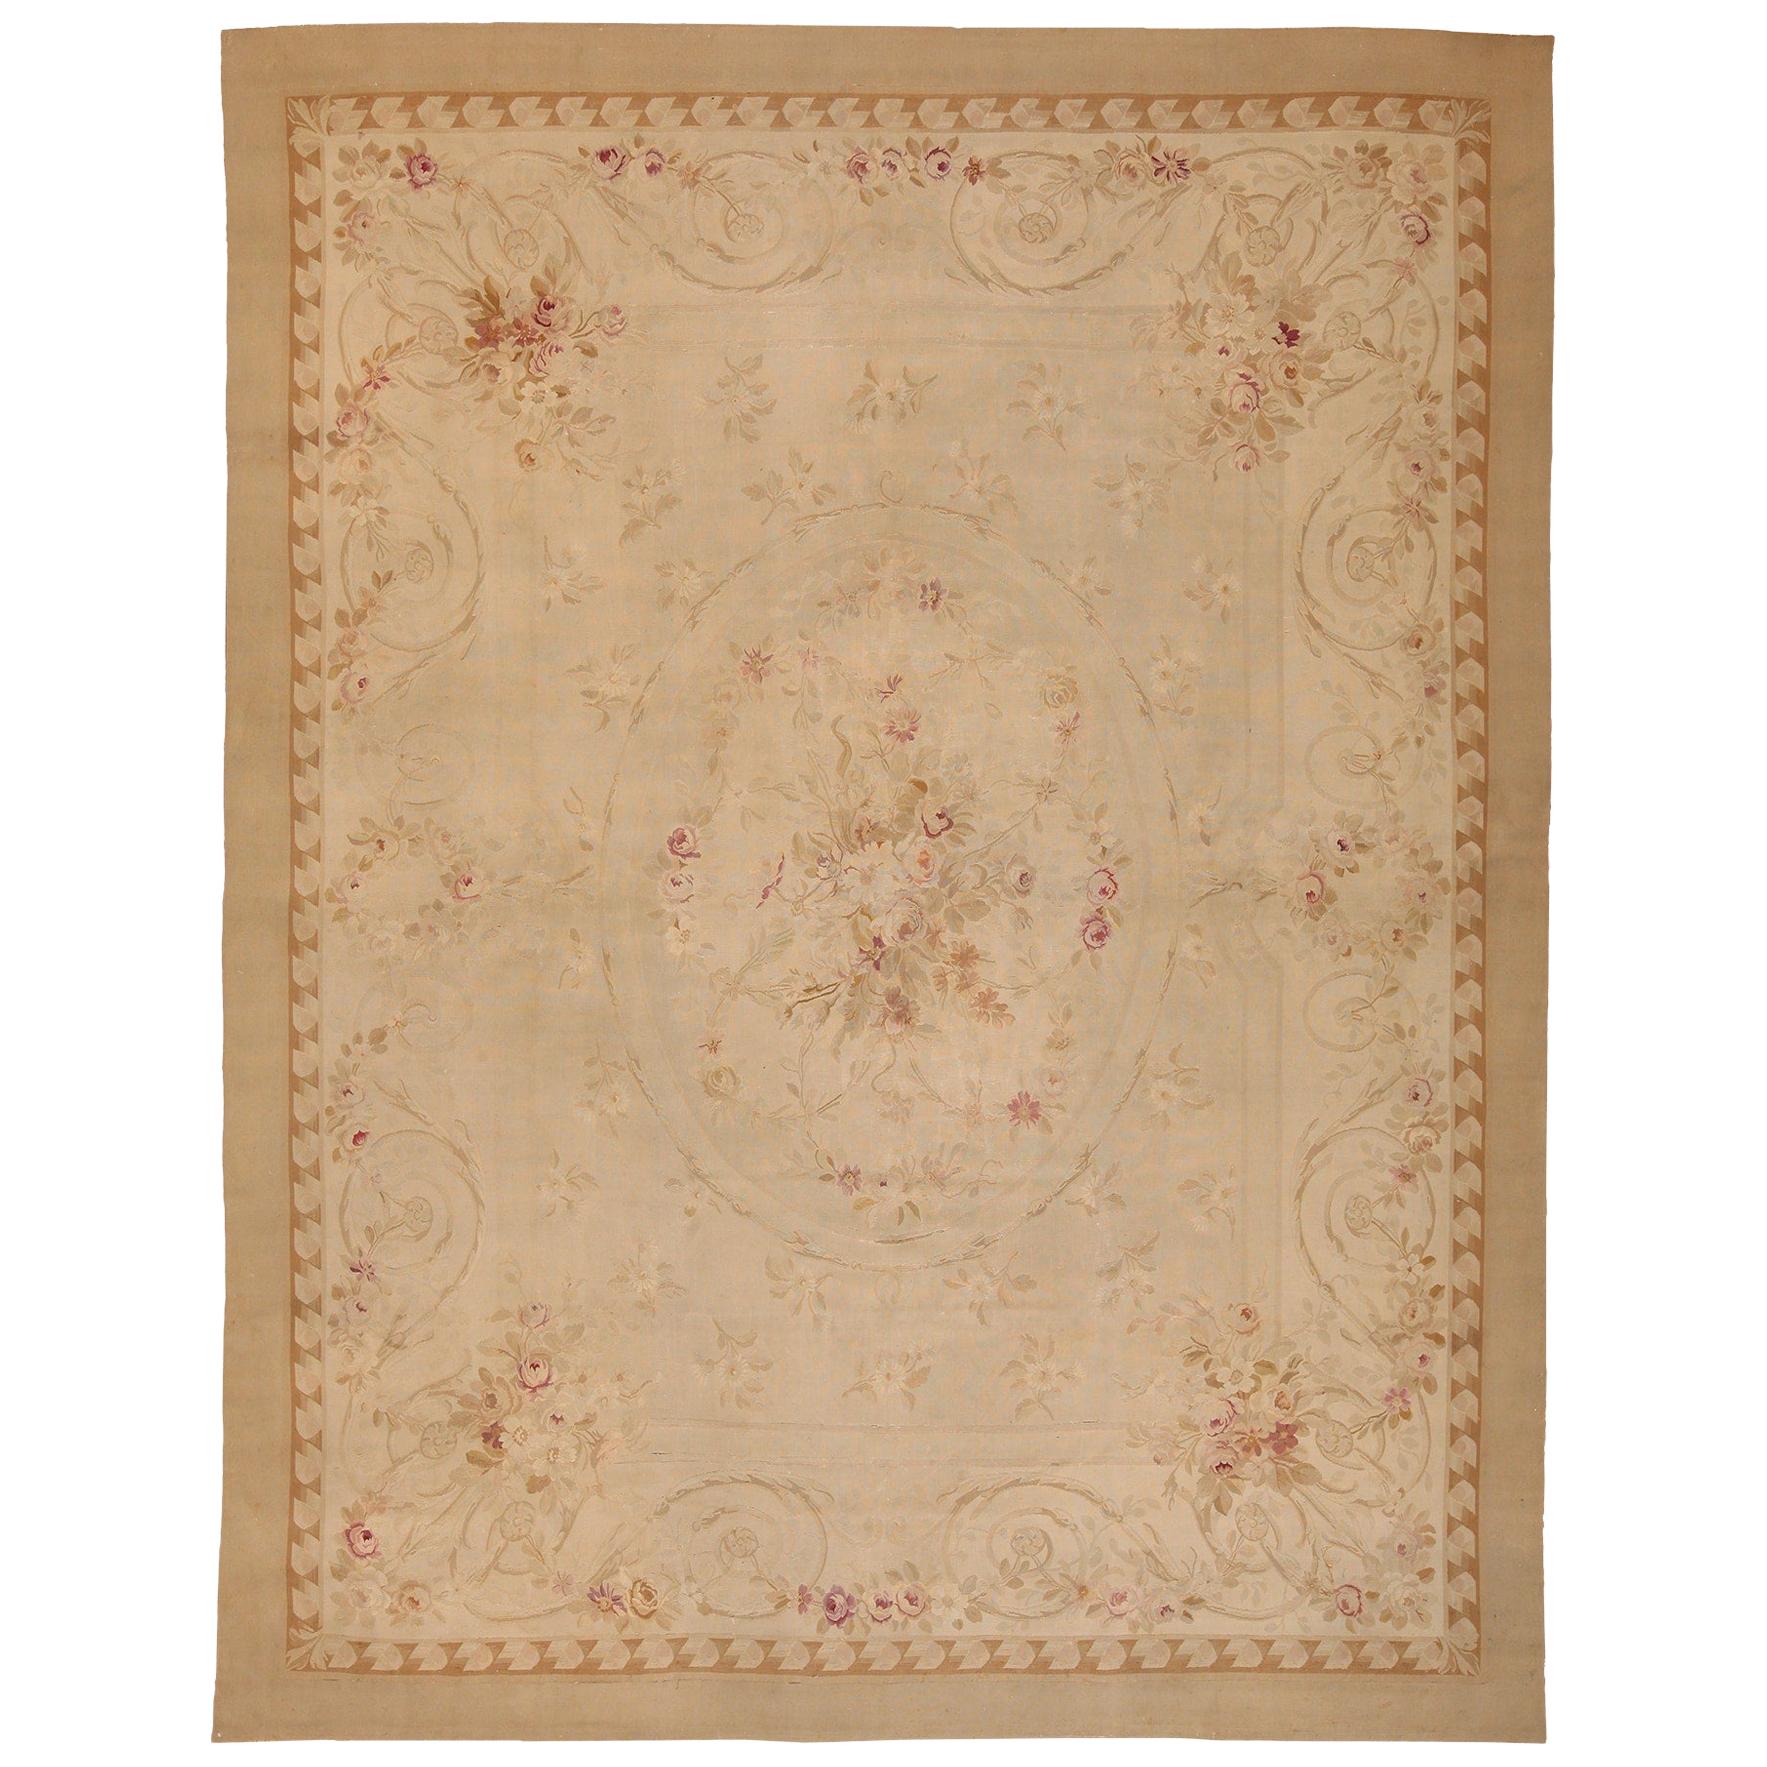 Nazmiyal Collection Antique Ivory French Aubusson Rug. Size: 10 ft x 13 ft 6 in 